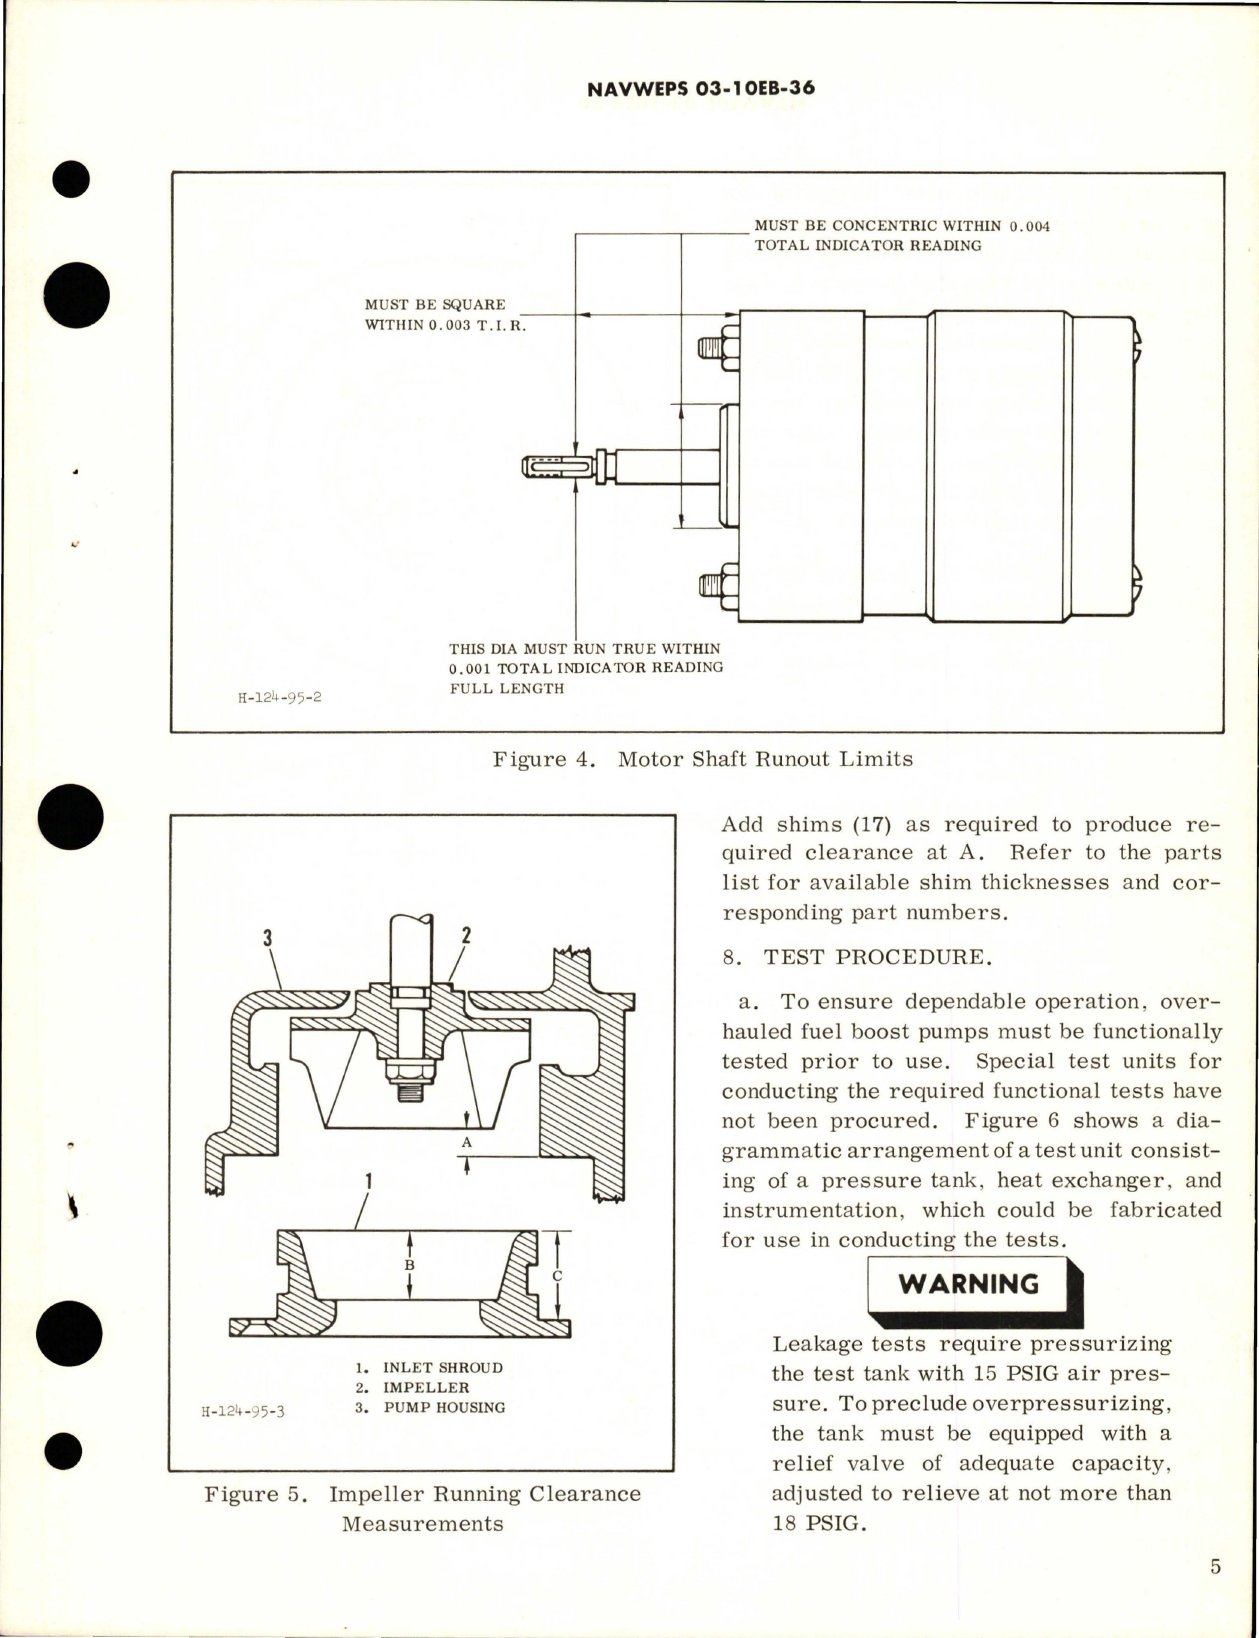 Sample page 5 from AirCorps Library document: Overhaul Instructions with Illustrated Parts Breakdown for Fuel Booster Pump - Part RR-11810A 